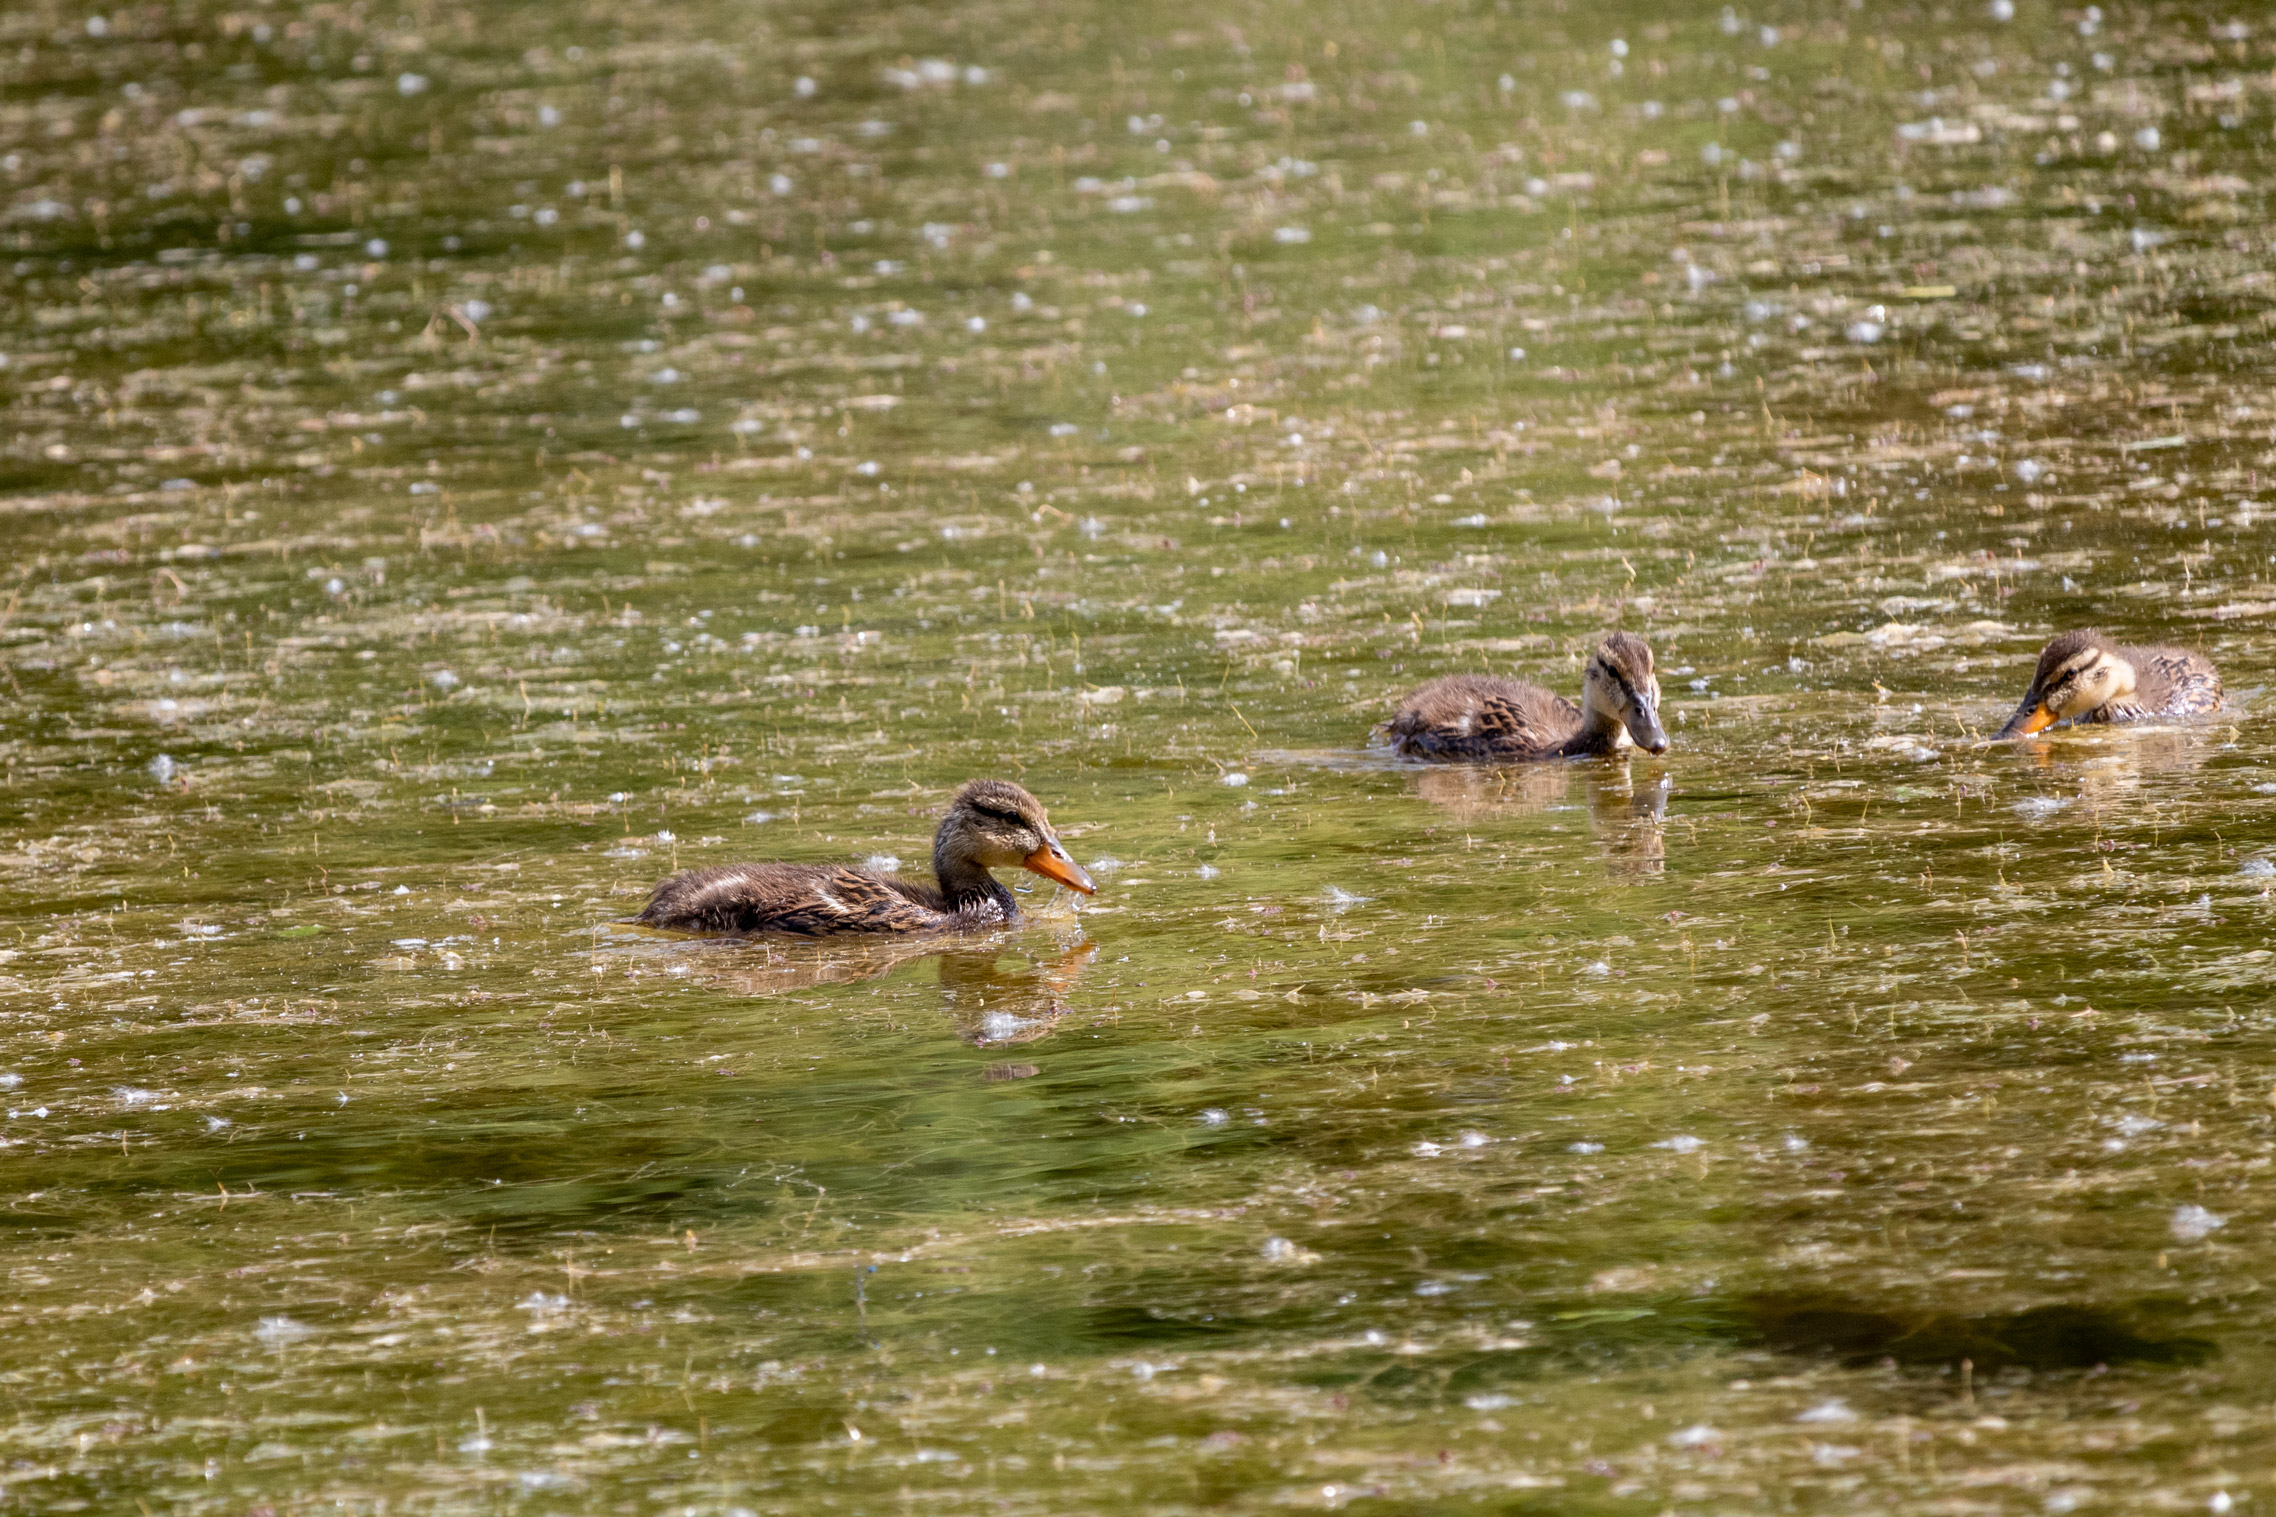 Three baby ducks floating in a lake